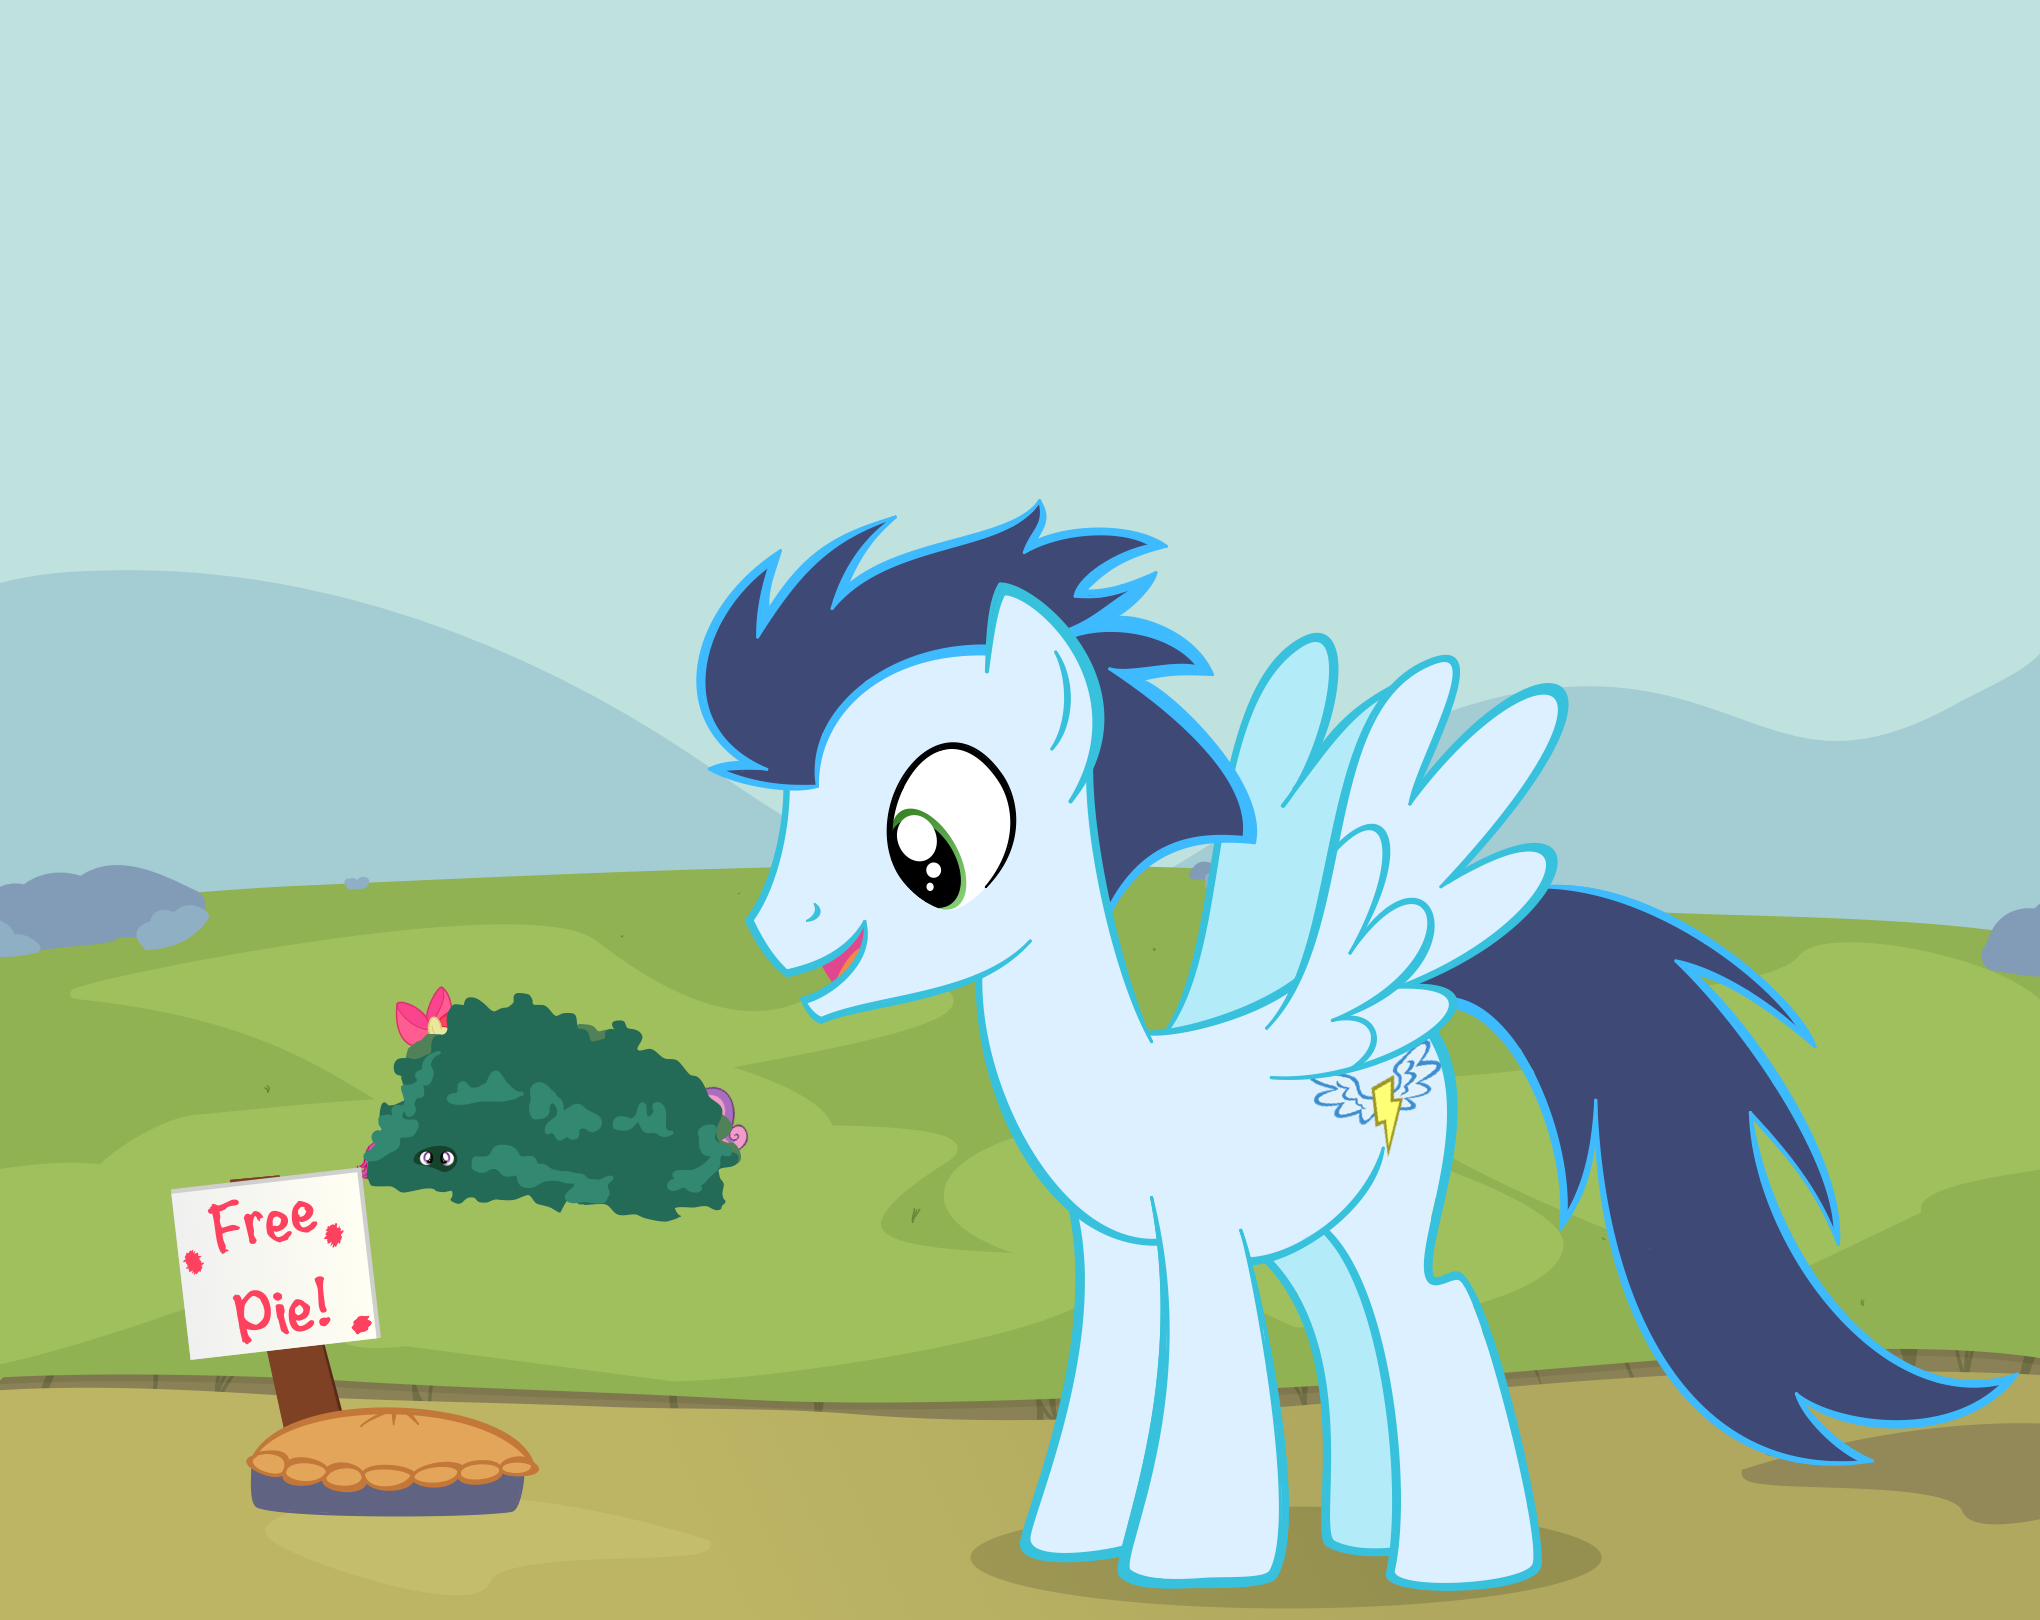 soarin_and_his_pie_by_thecoltalition-d5f